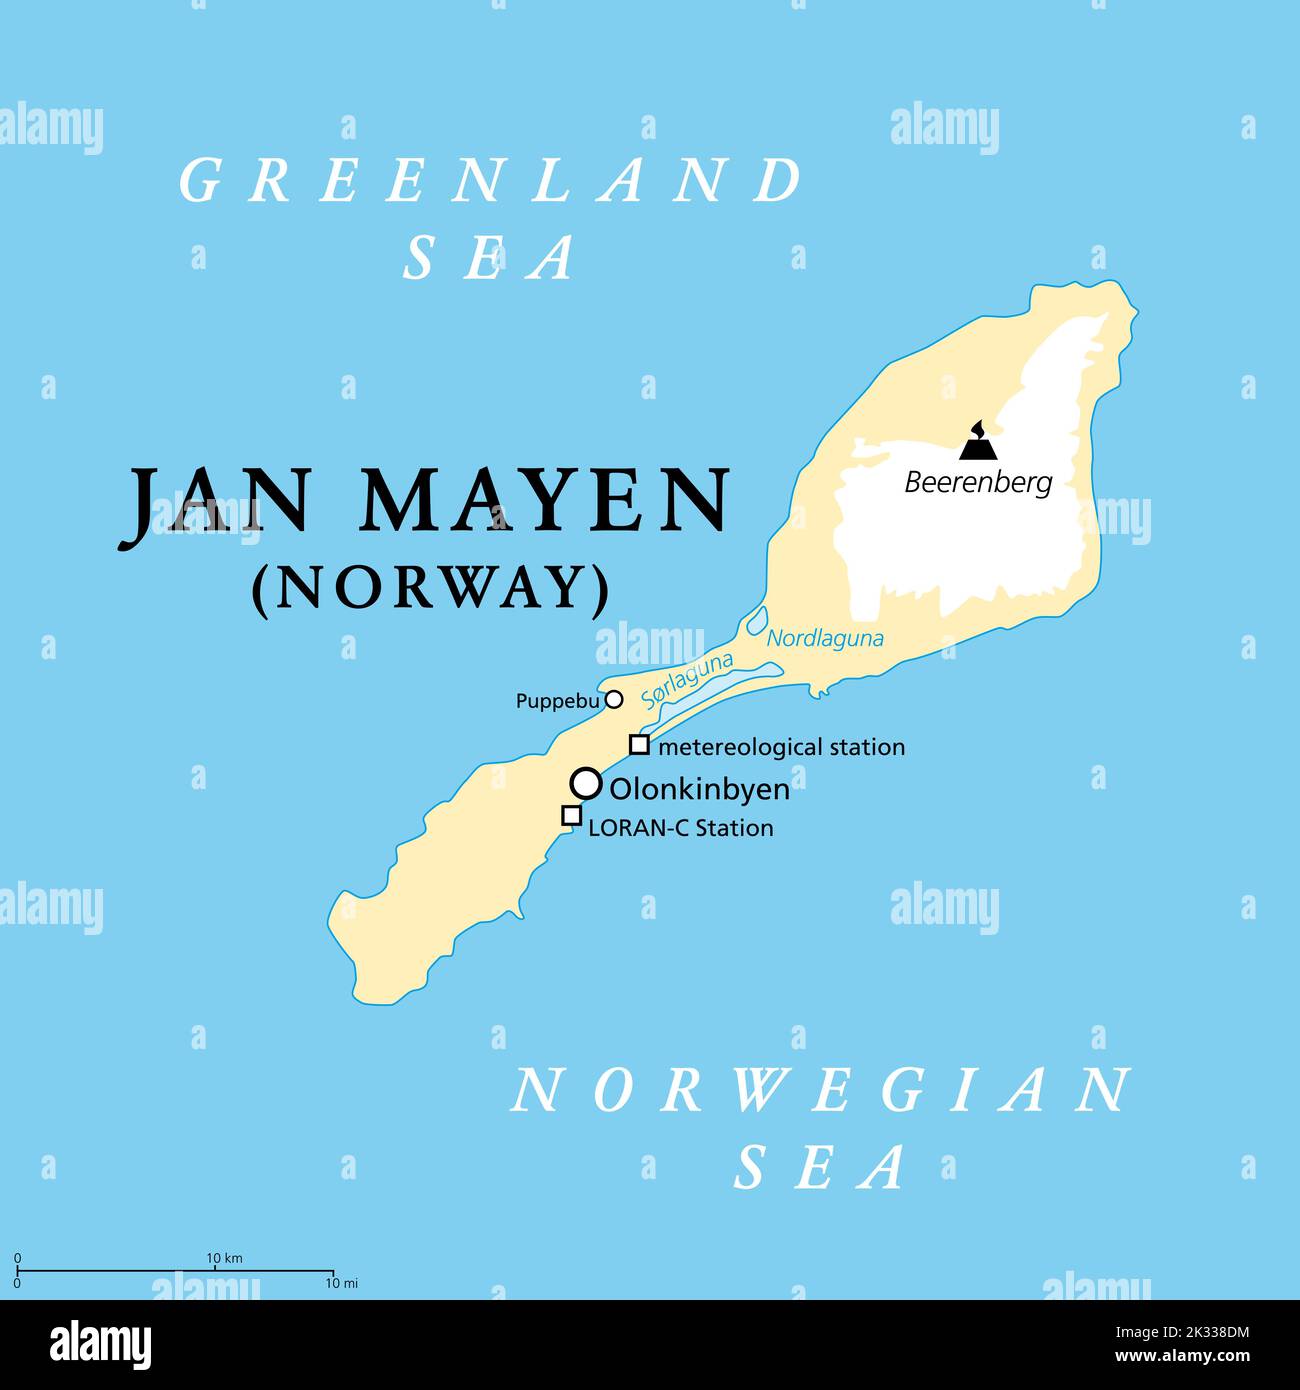 Jan Mayen, political map. Norwegian volcanic island in Arctic Ocean, between Greenland Sea and Norwegian Sea, partly covered with glaciers. Stock Photo